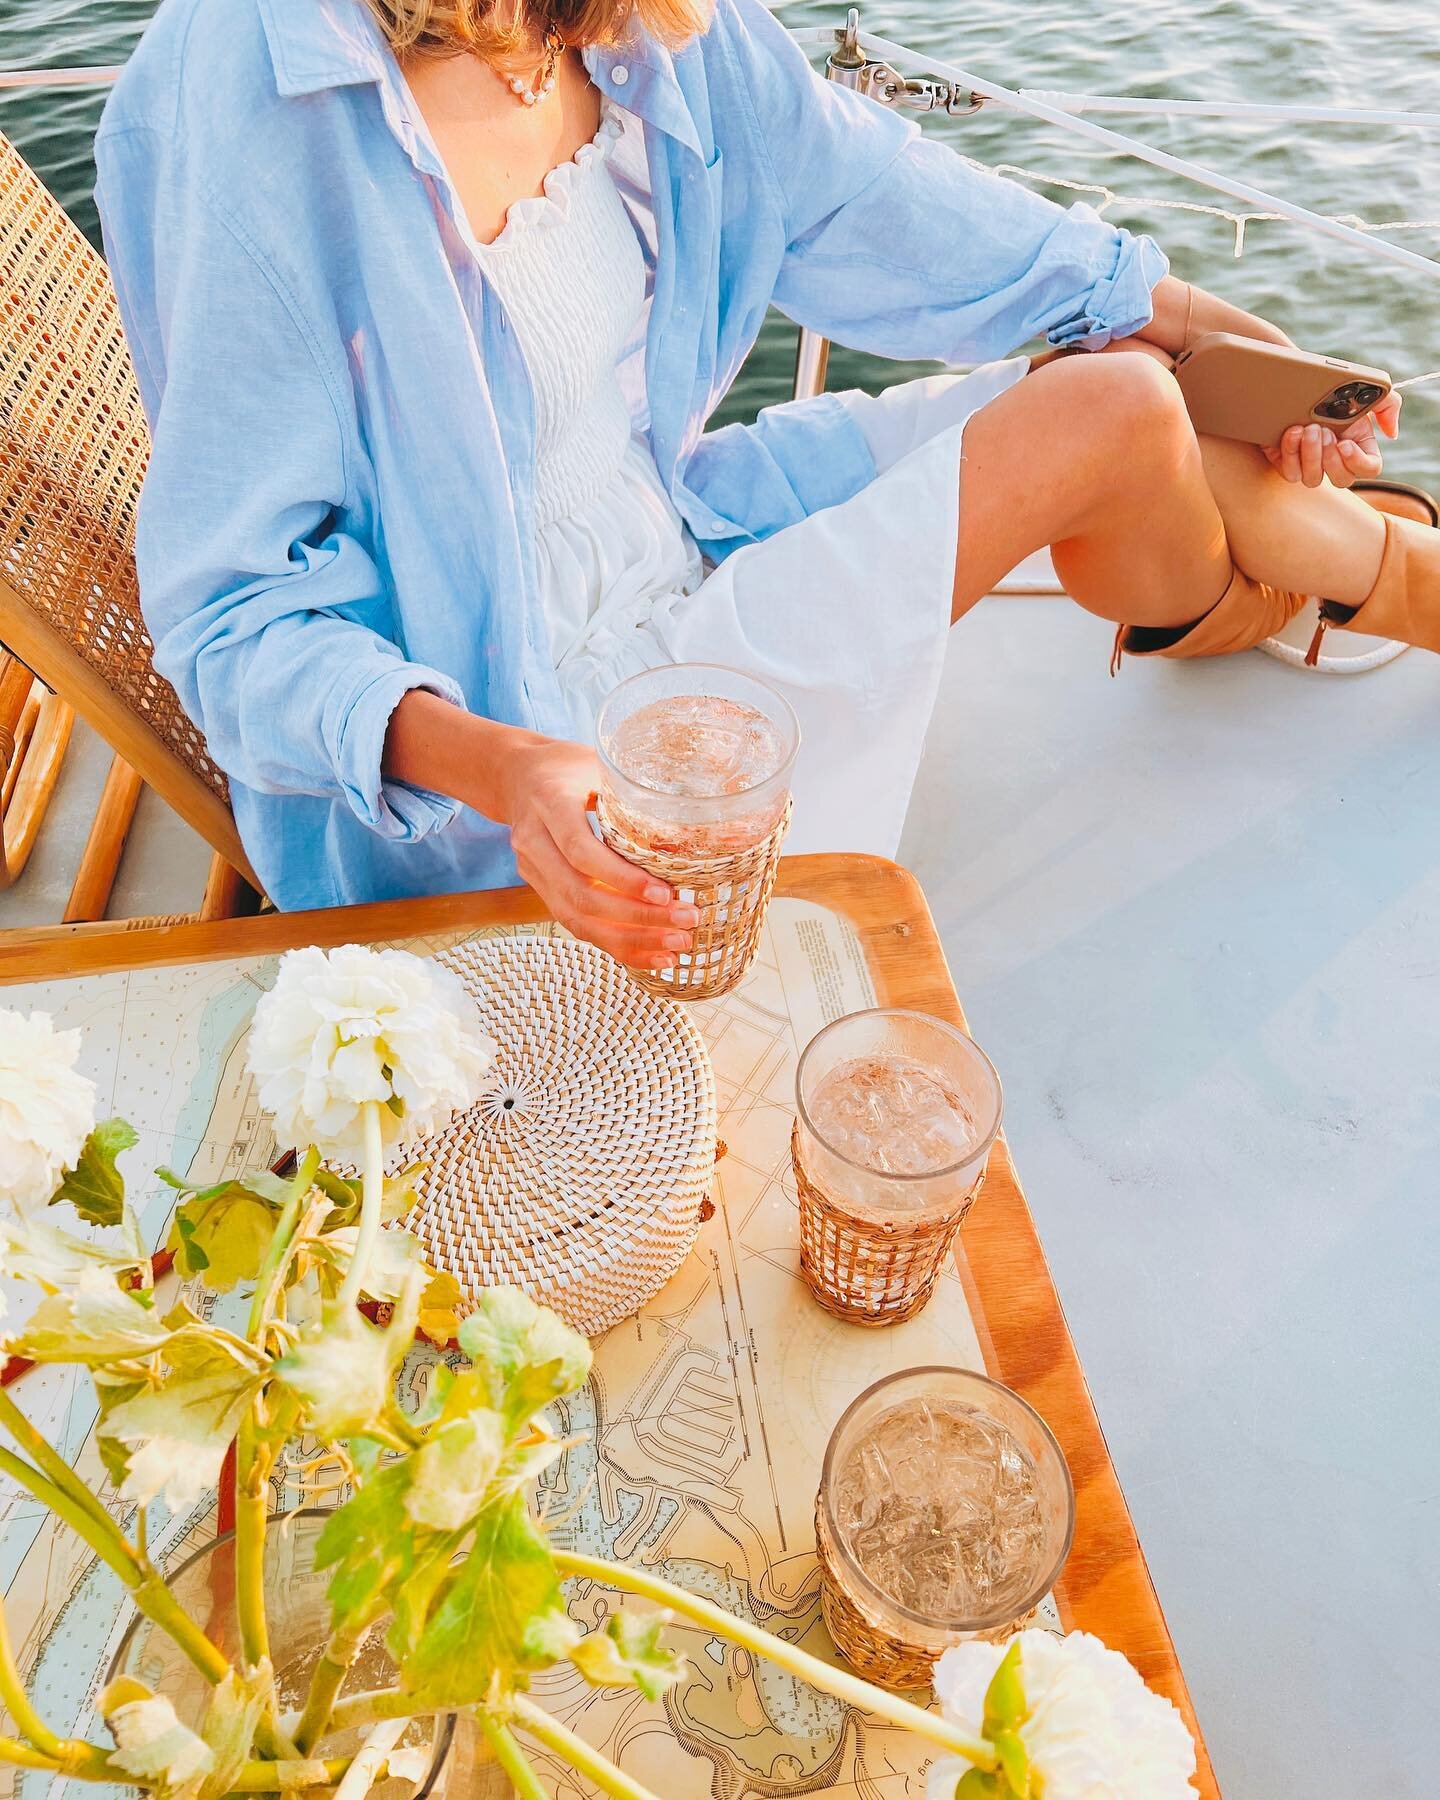 Bring your favorite beverage and enjoy these beautiful summer days cruising around the bay! Book your cruise now at www.theboatpeoplecruise.com #boatcruise #newportbeachca #sunsetcruise #datenight #proposalideas #girlsnight #visitnewportbeach #sailbo